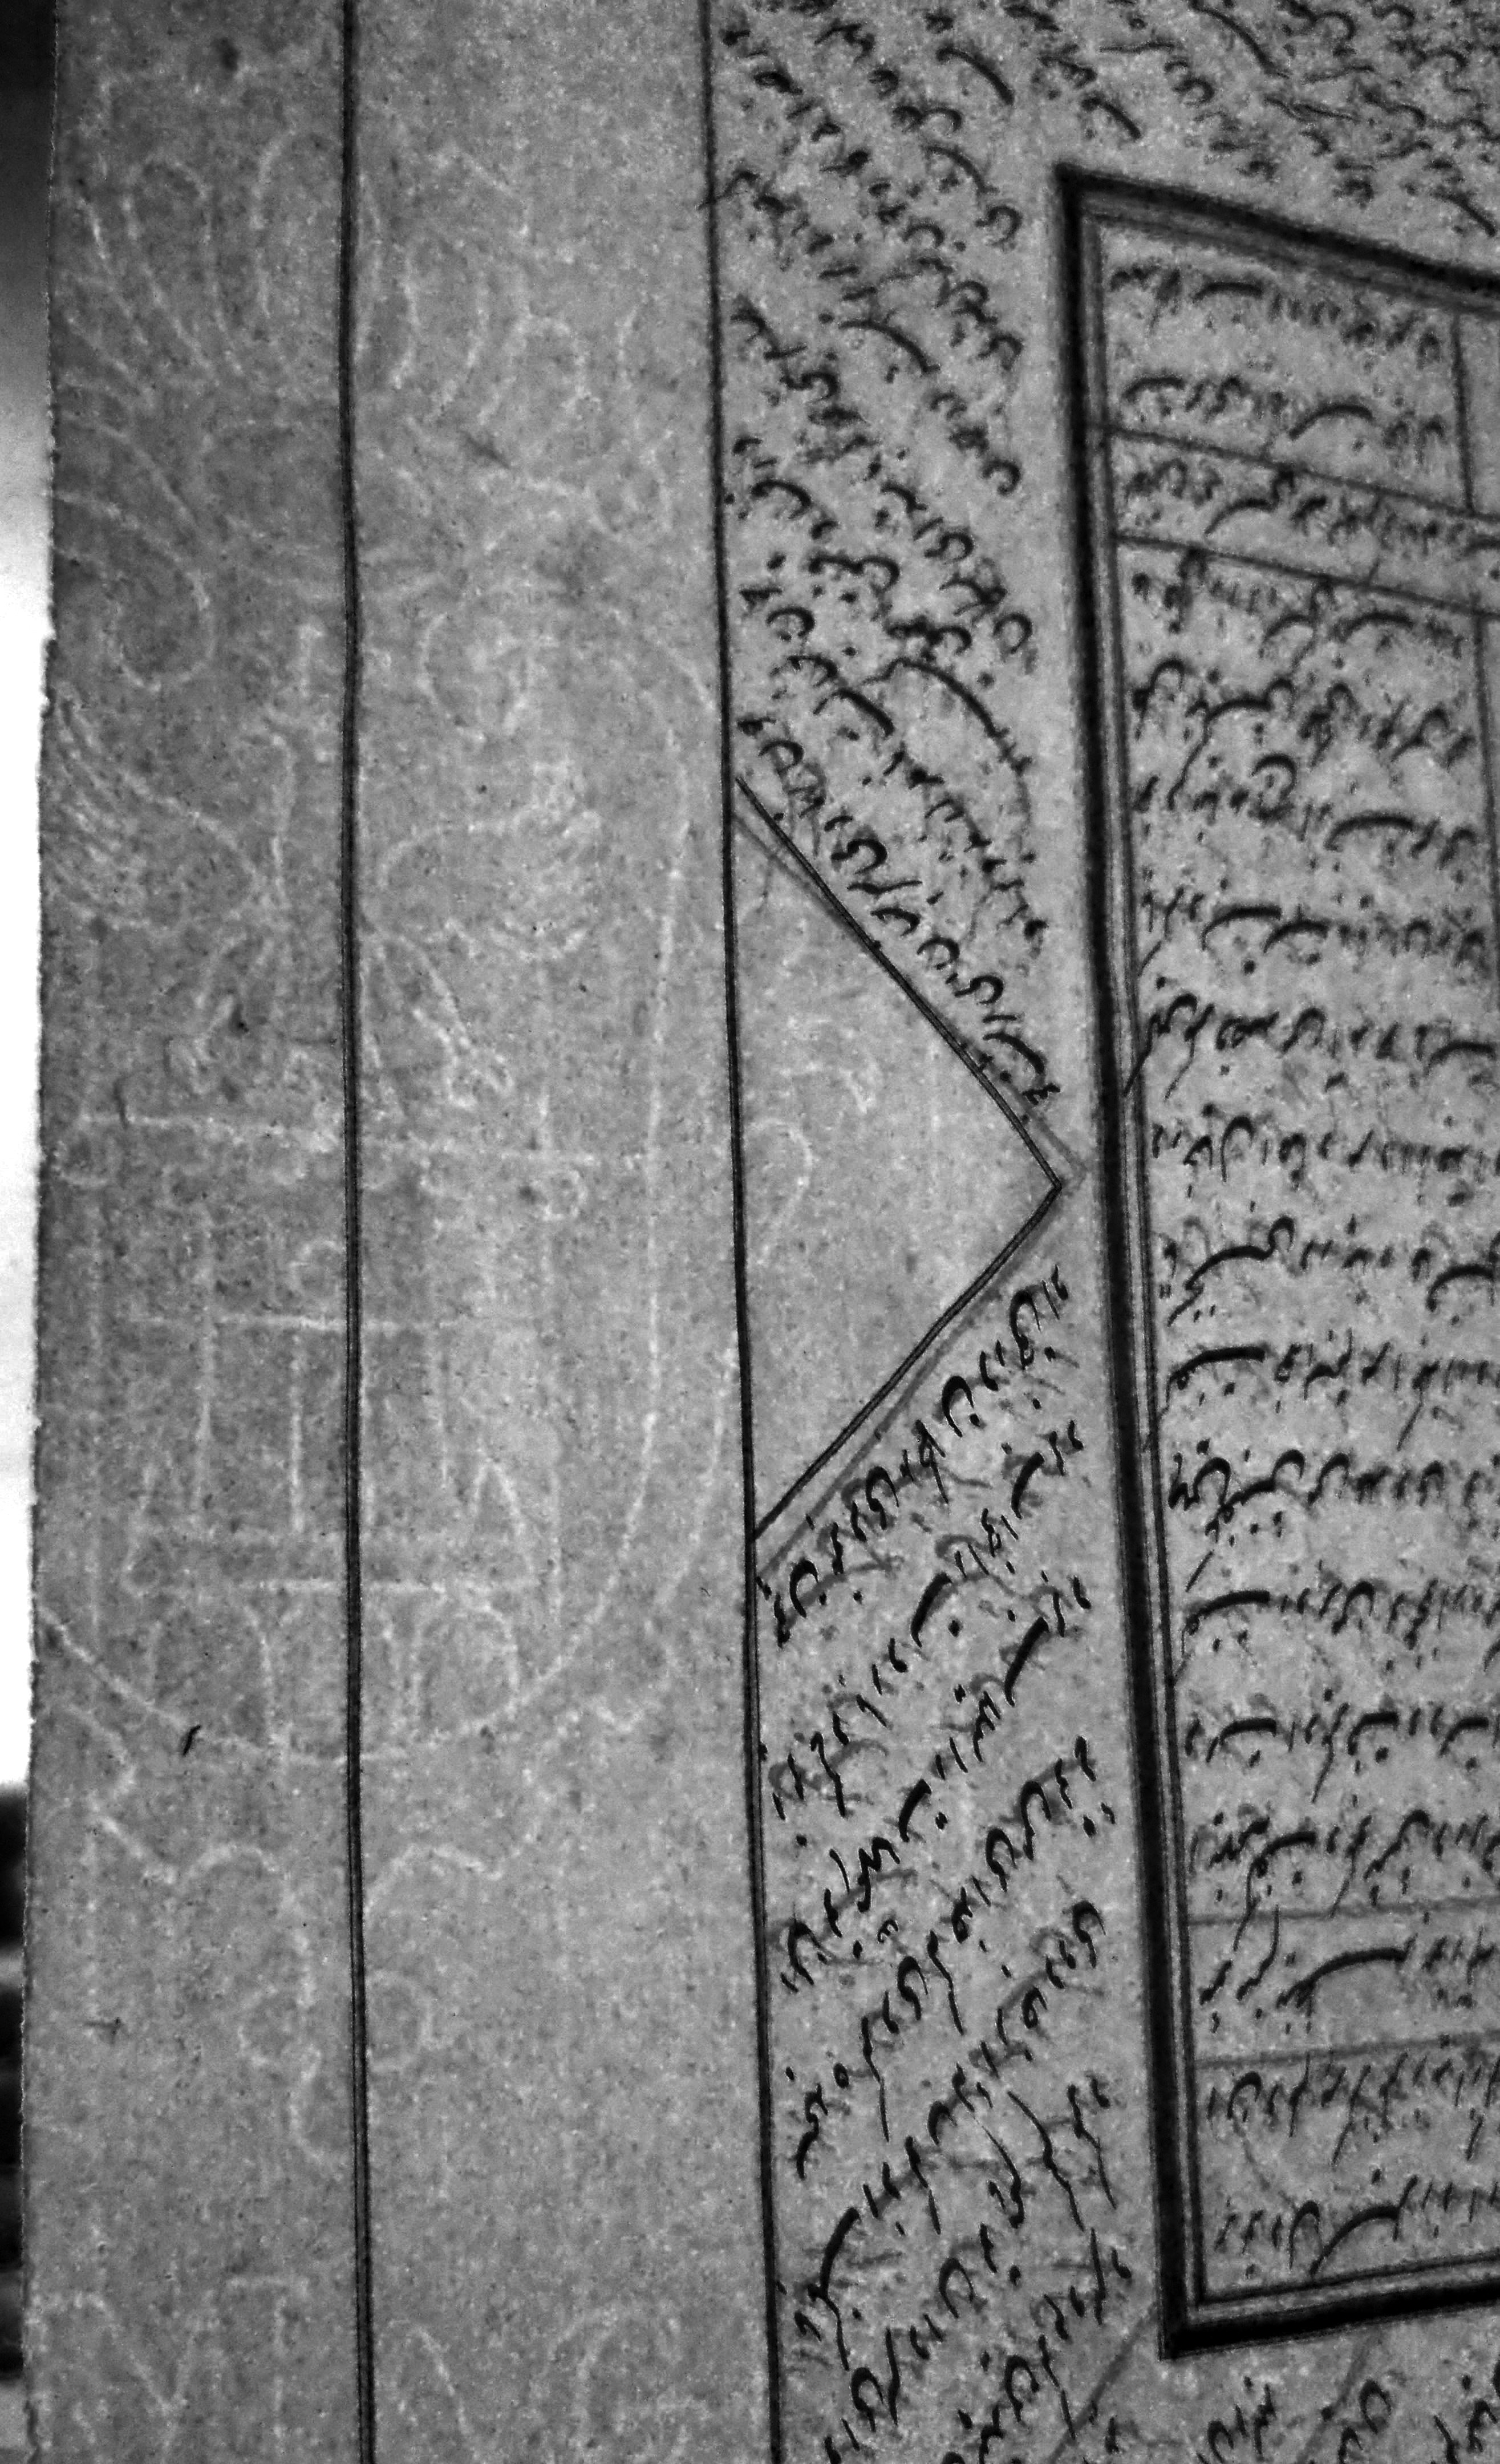 Watermark of scrollwork with "...MAGNANI" visible below in p.802, Isl. Ms. 284